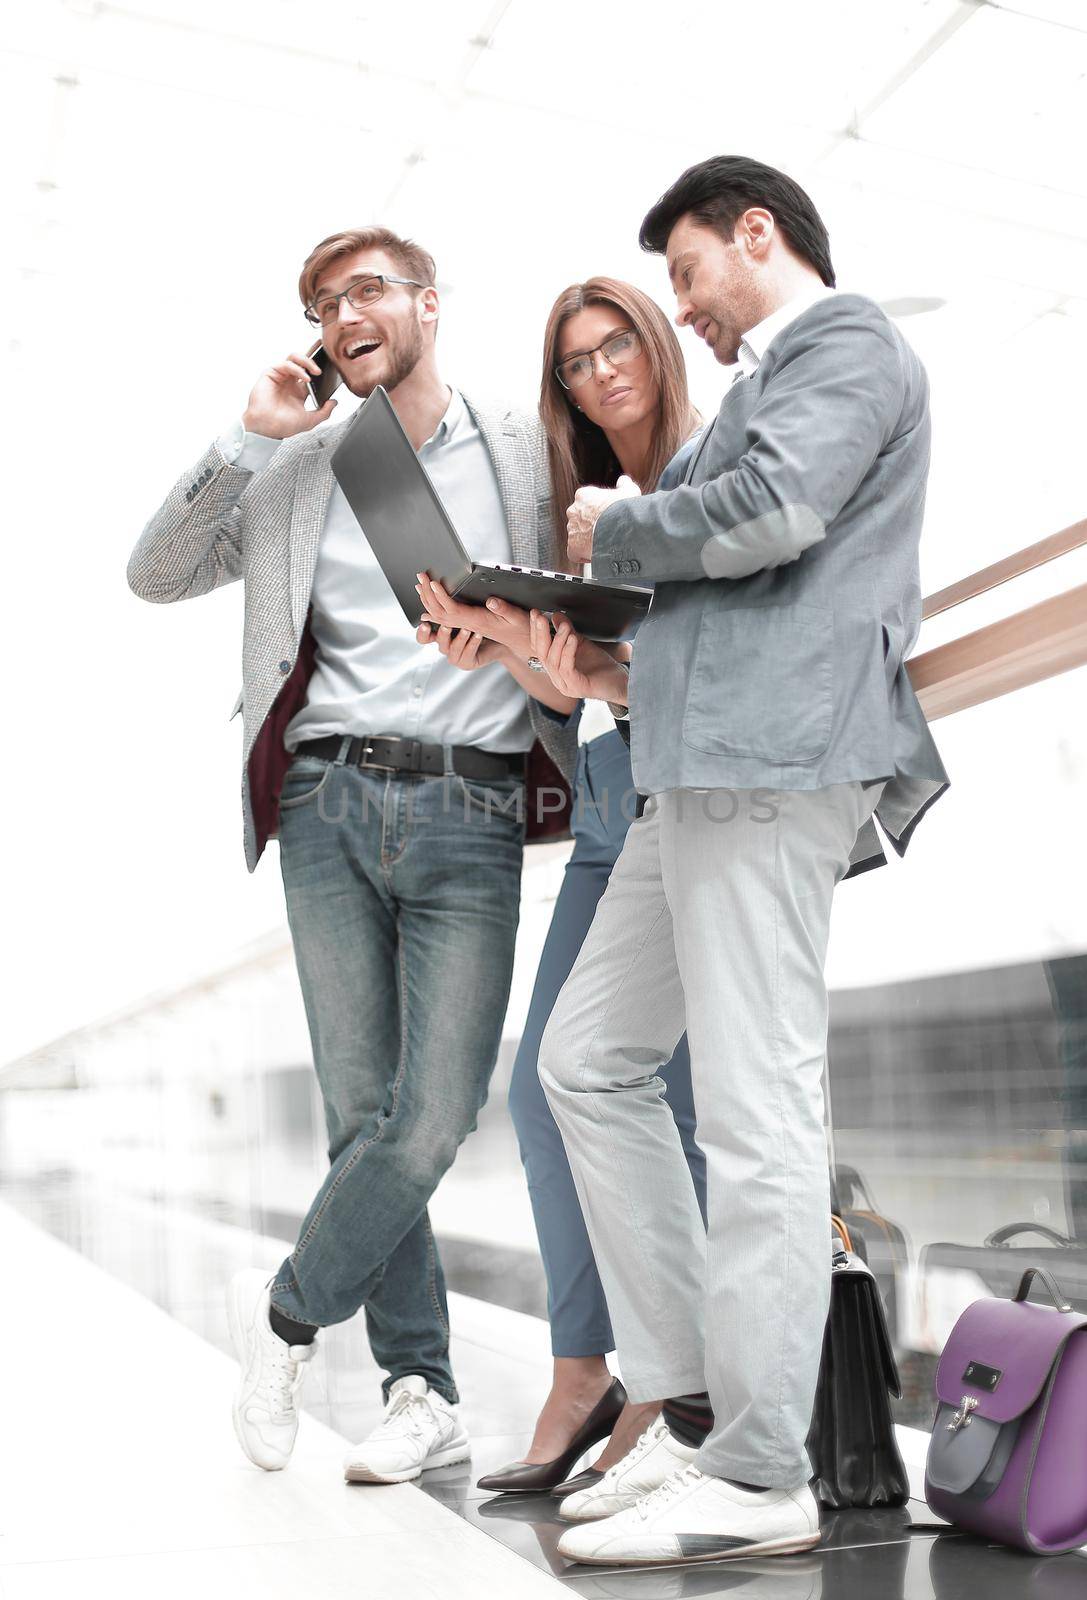 business colleagues using their gadgets standing in the office lobby. photo with copy space